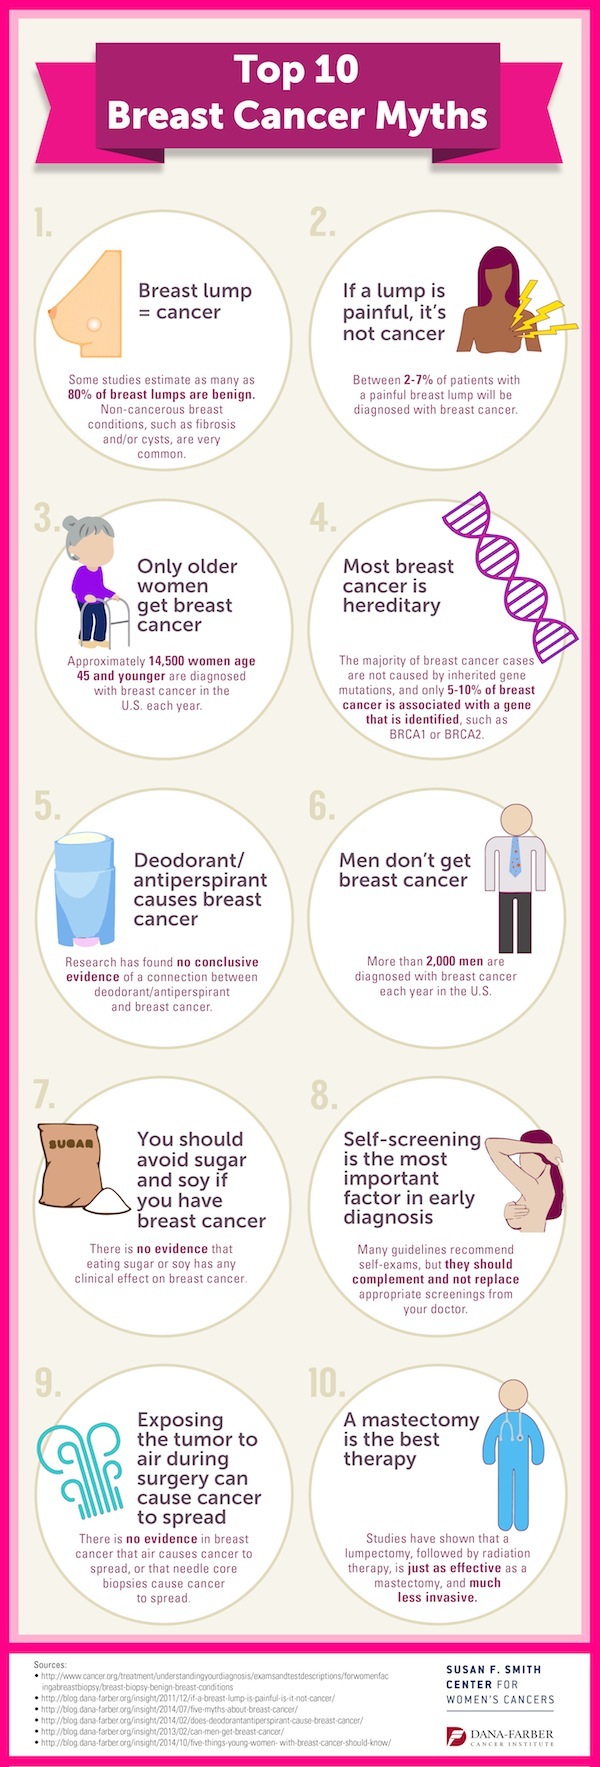 Breast Cancer myths infographic